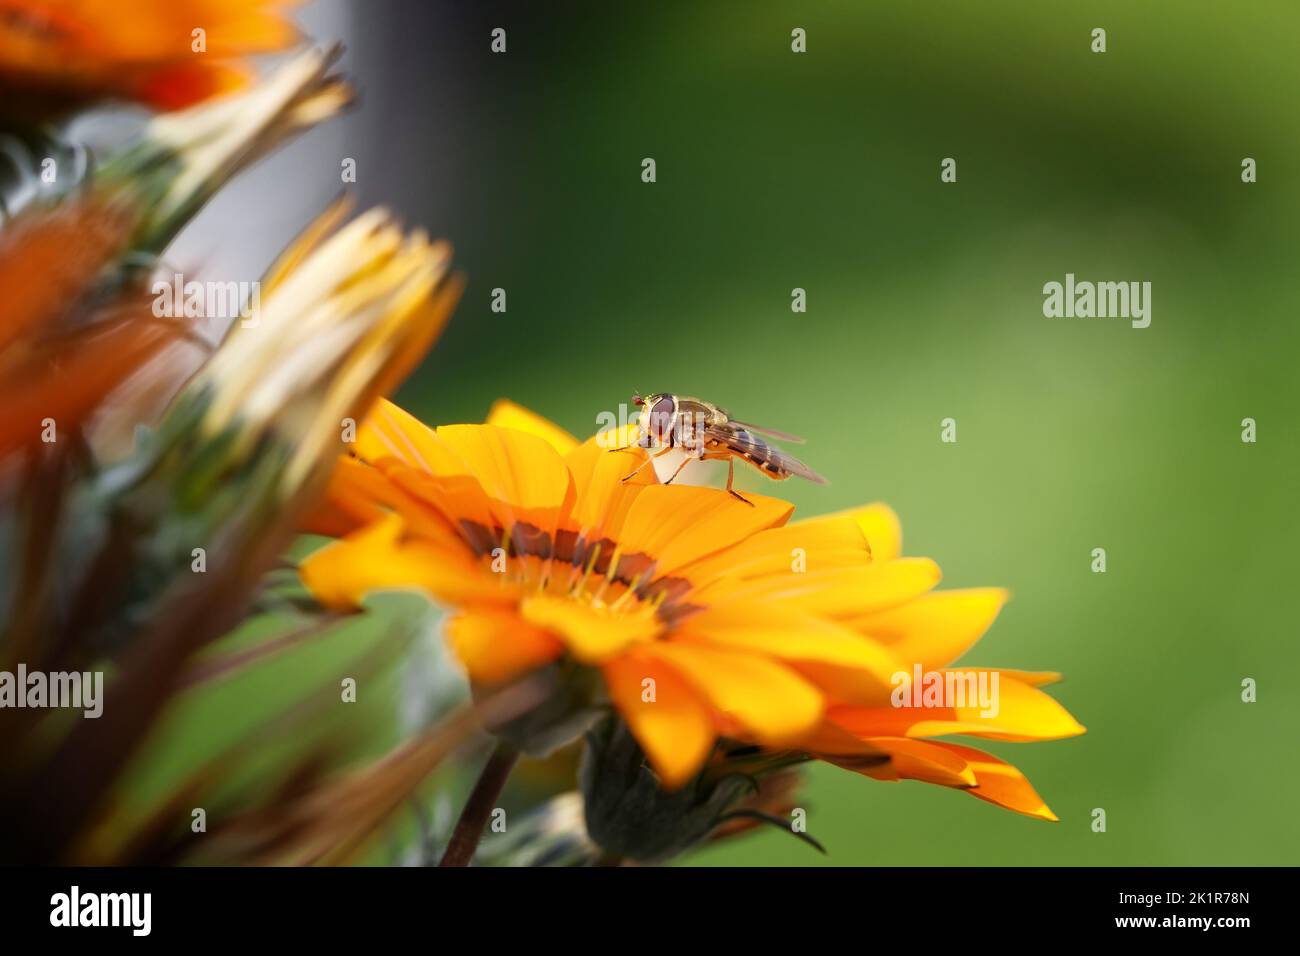 A hoverfly sits on the edge of a yellow flower. Blurred background. Macro photography. Stock Photo